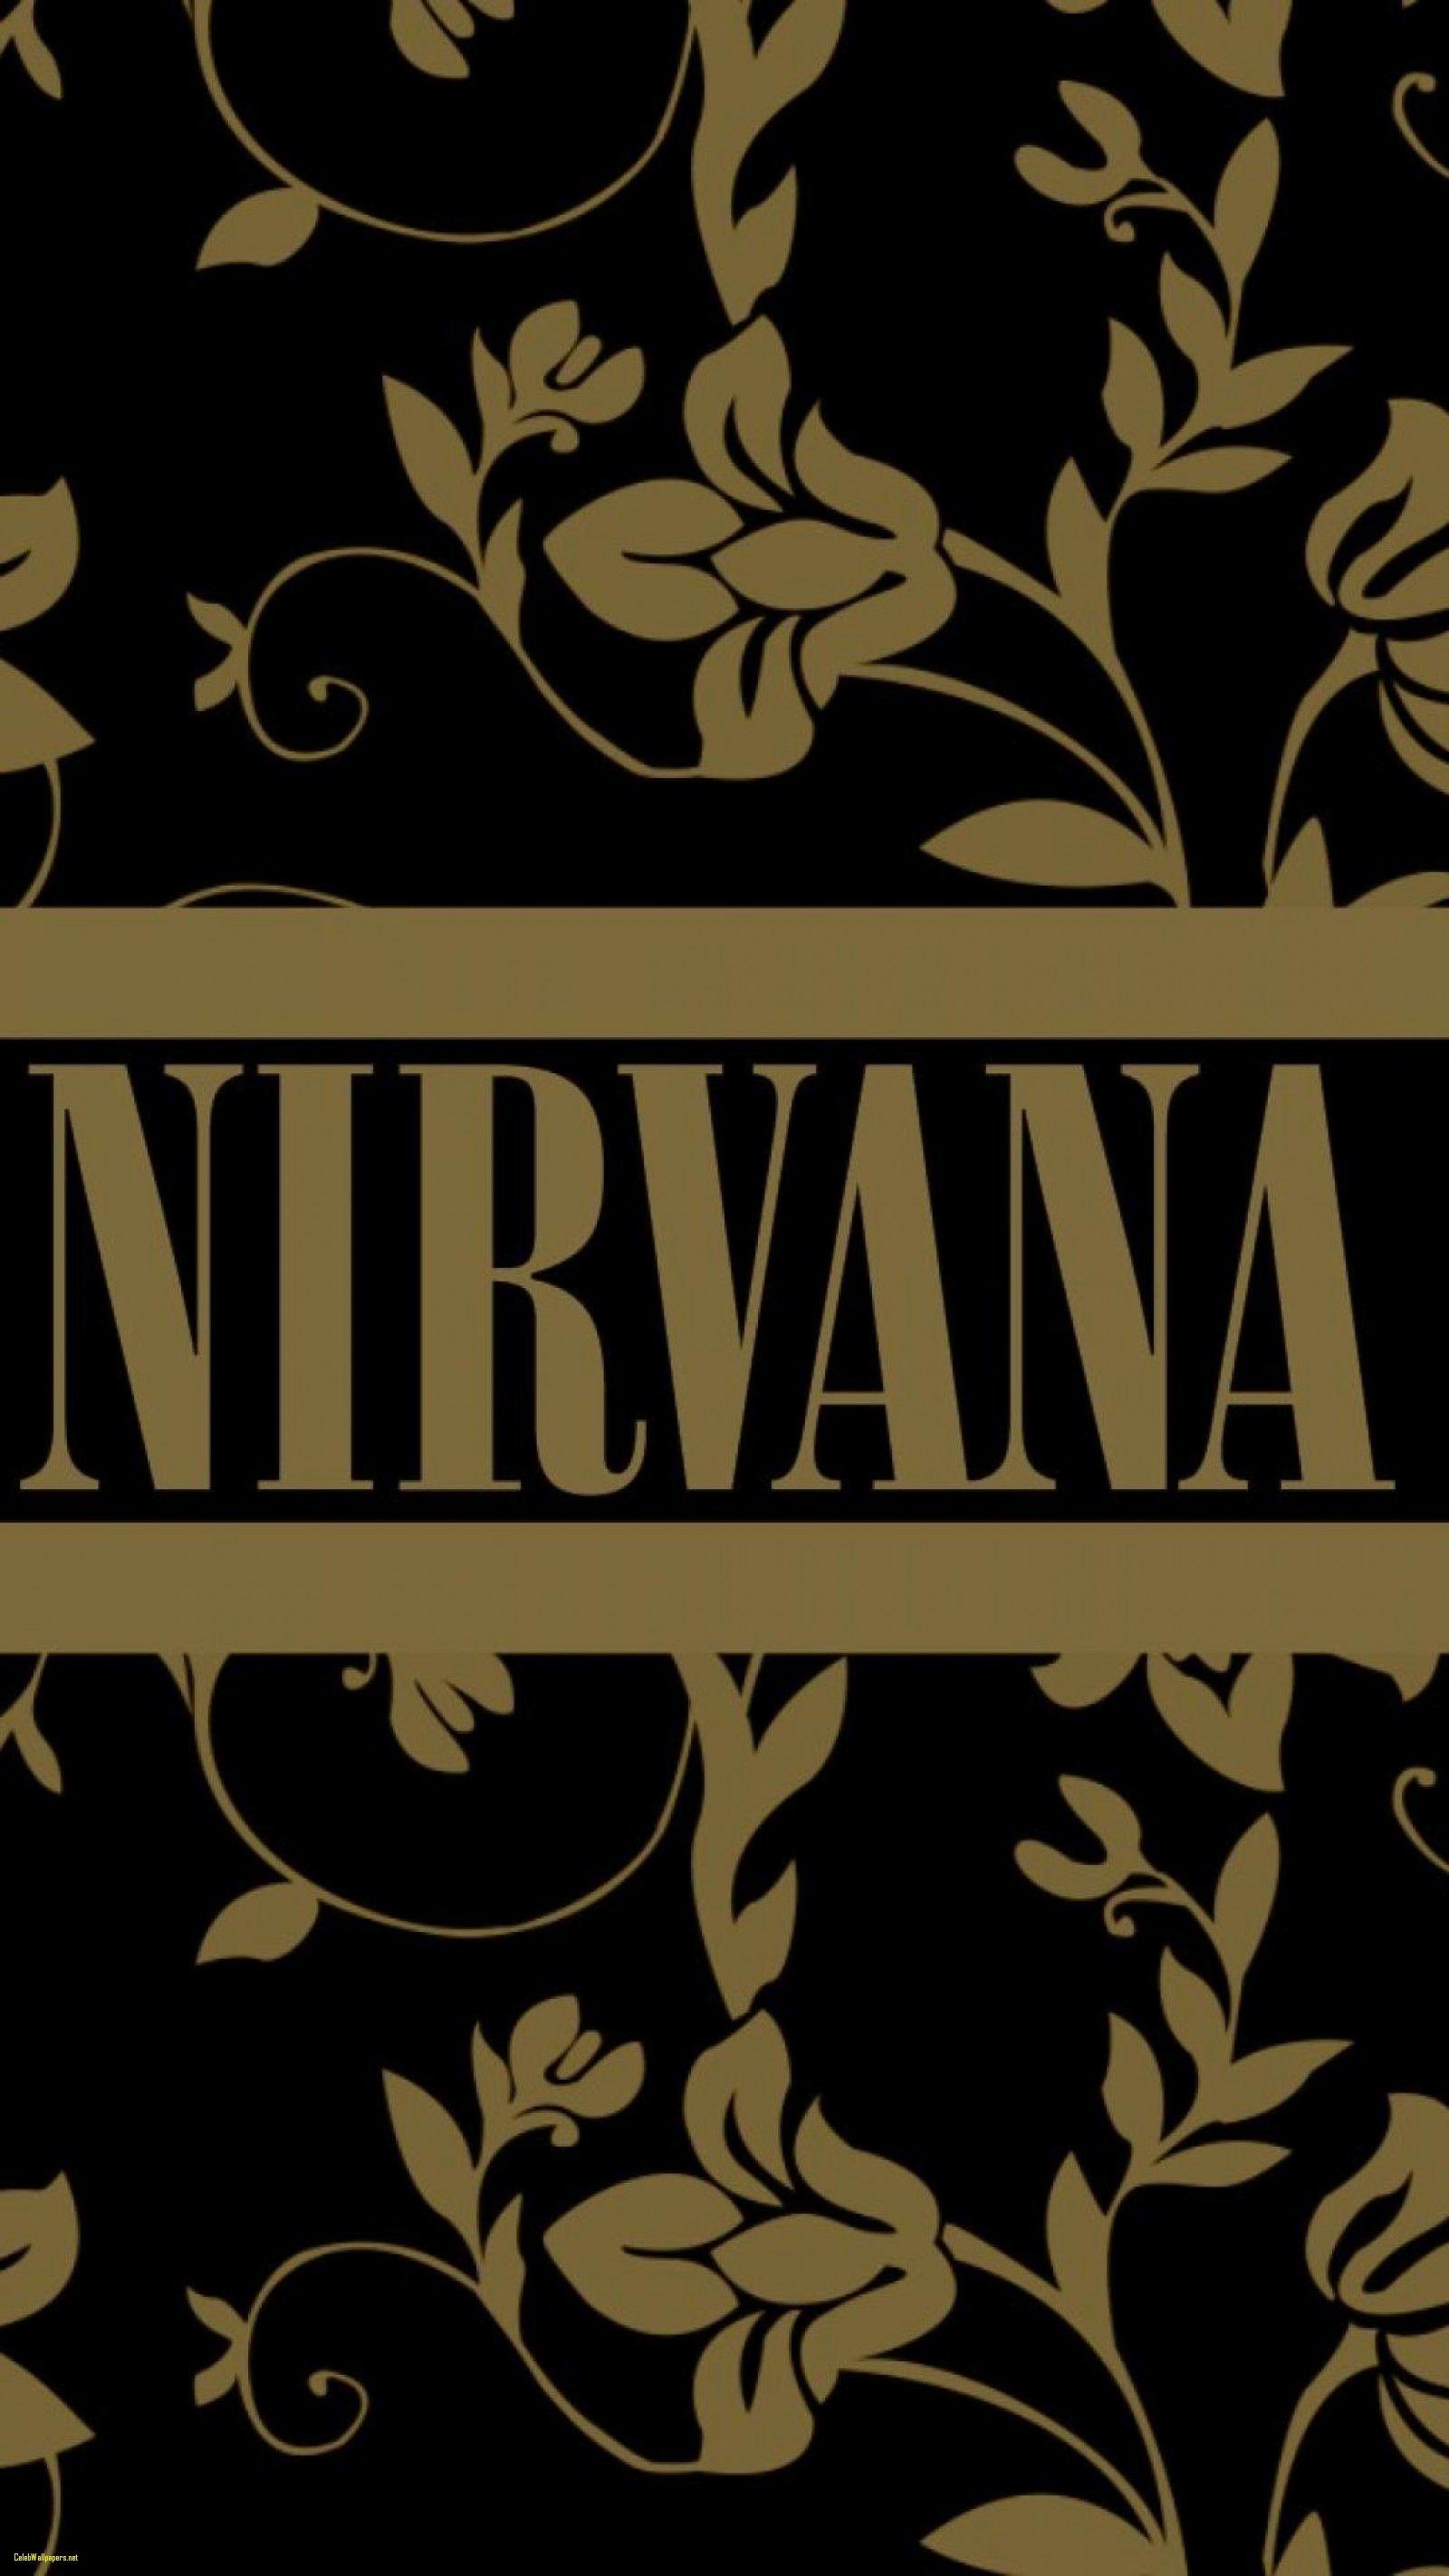 Nirvana iPhone Wallpaper with high-resolution 1080x1920 pixel. You can use this wallpaper for your iPhone 5, 6, 7, 8, X, XS, XR backgrounds, Mobile Screensaver, or iPad Lock Screen - Nirvana